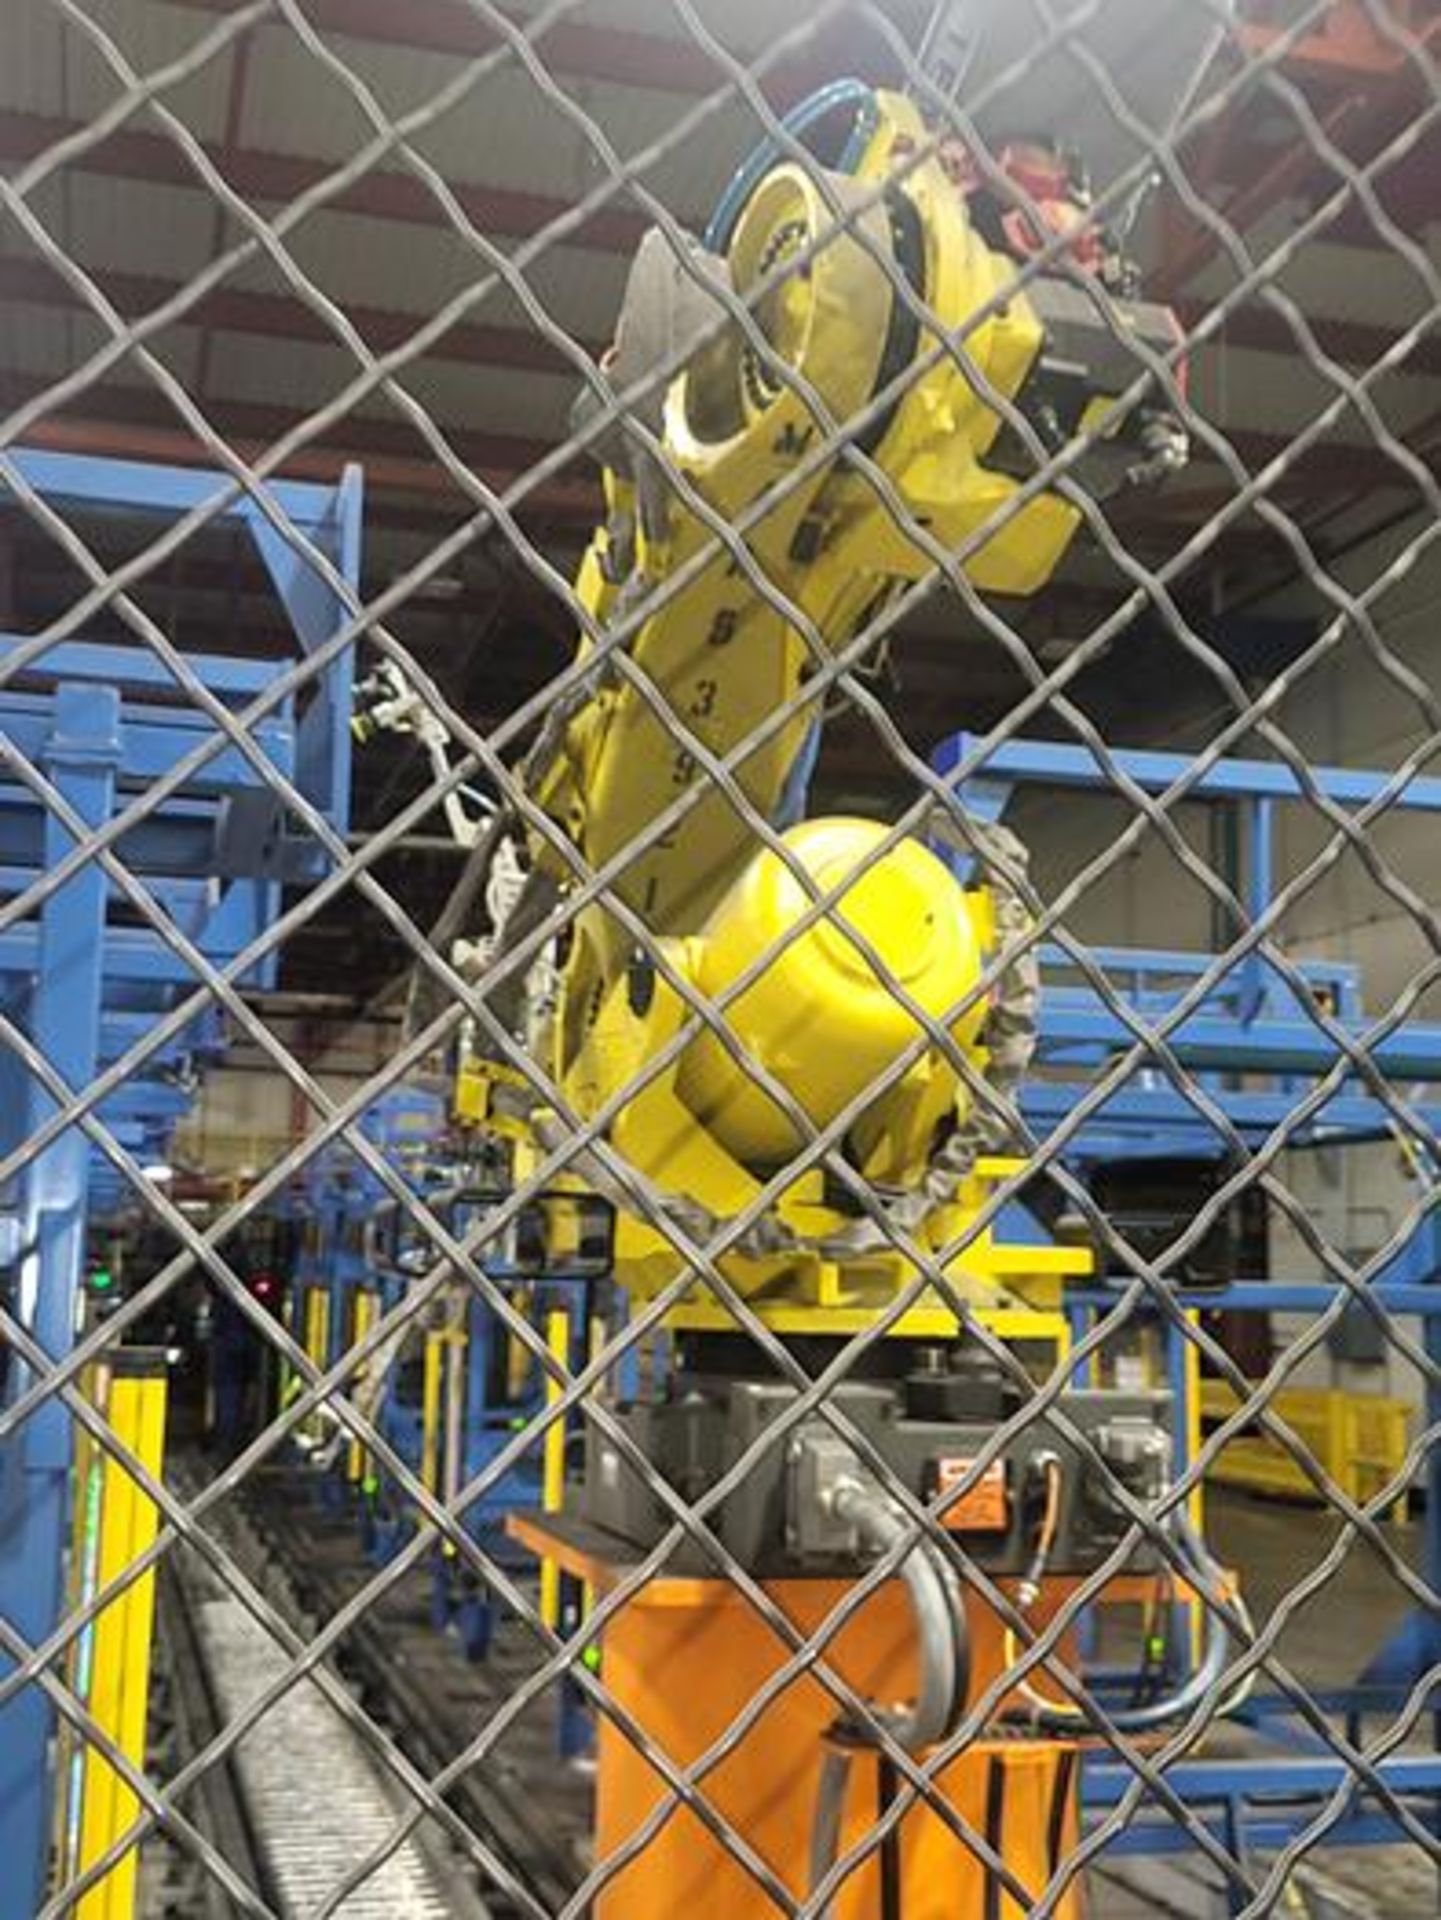 FANUC R-2000iB/125L ROBOT STAND MOUNTED ON 71 RTU WITH R-30iB CONTROLLER, SN 159953 - Image 3 of 4